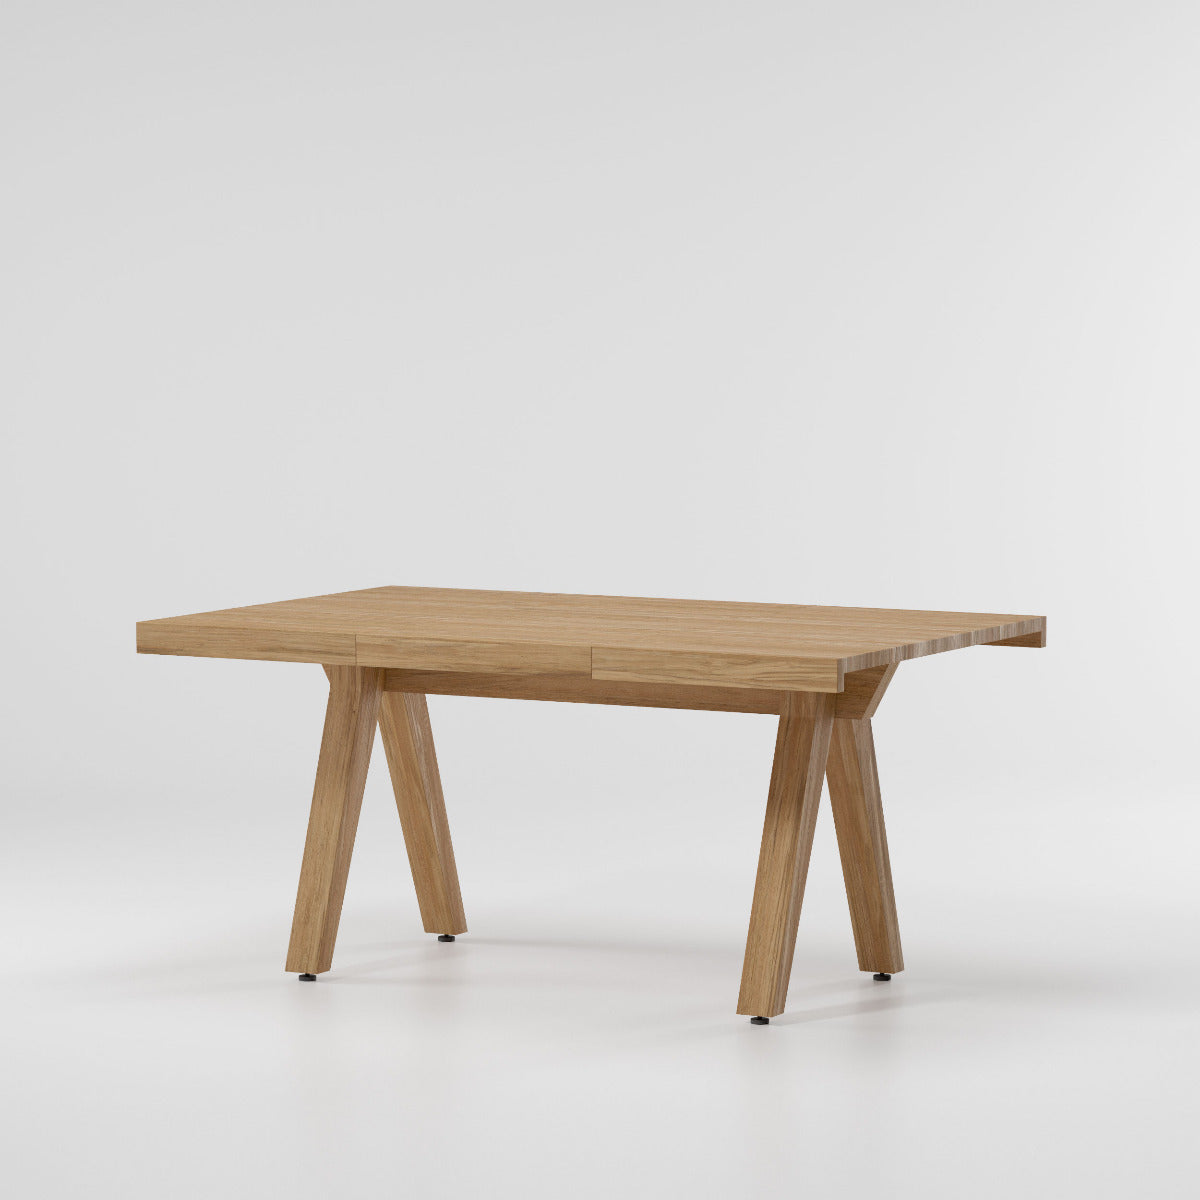 Kettal Vieques Dining Table / 6 Guests Teak Legs